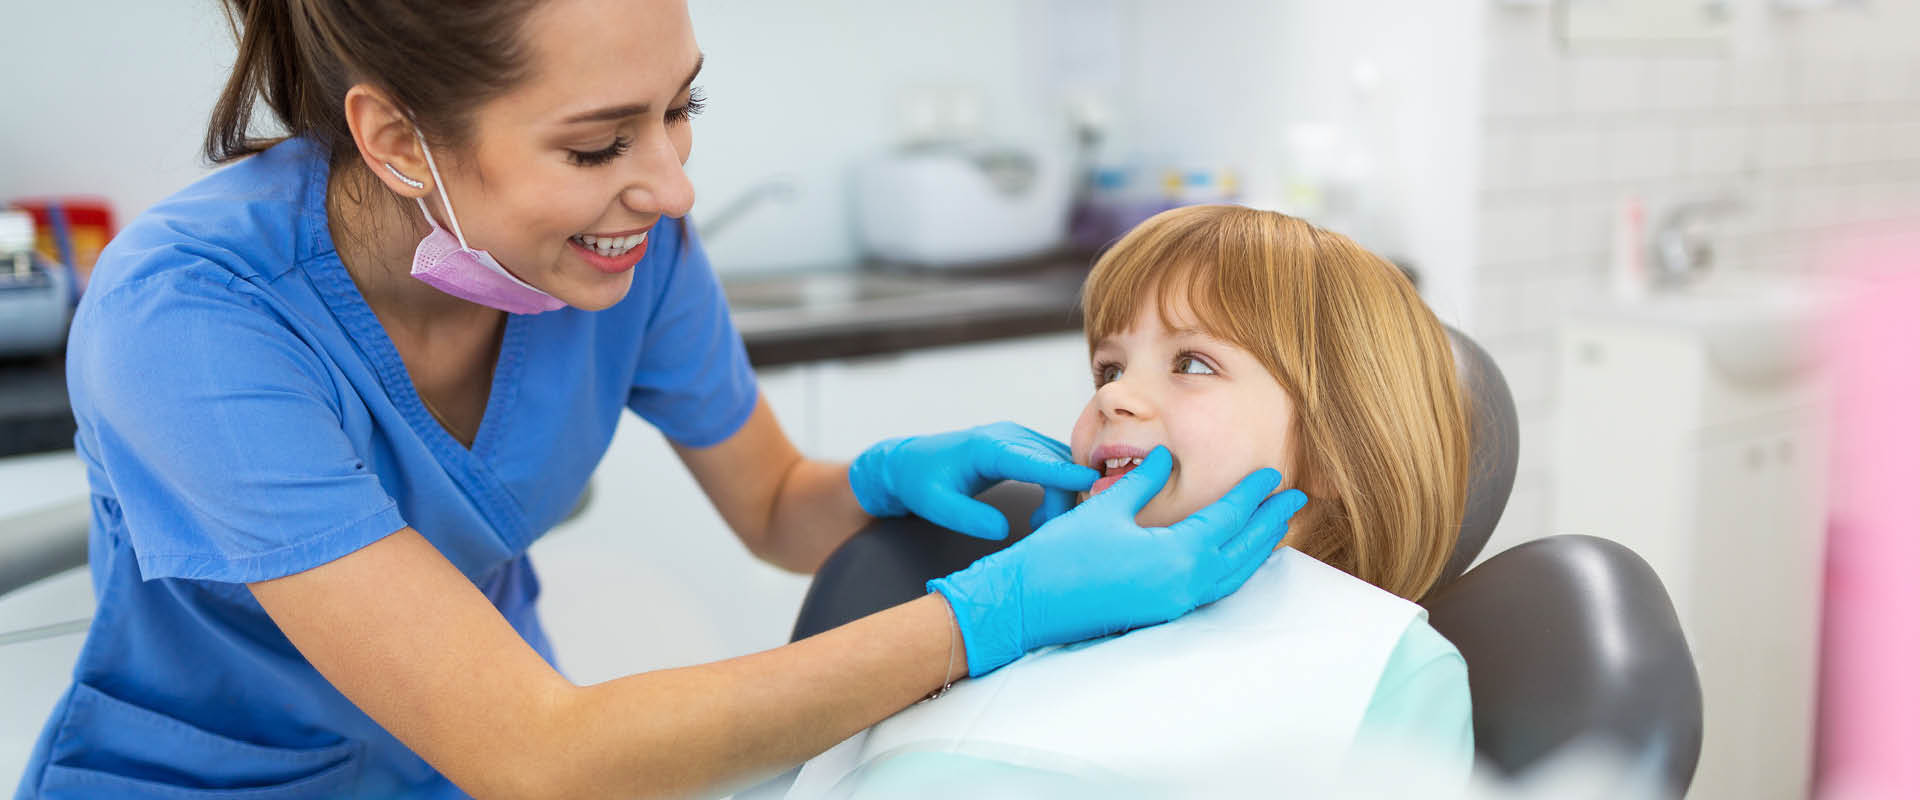 Oral Health Tips and Techniques for Kids Oct 23